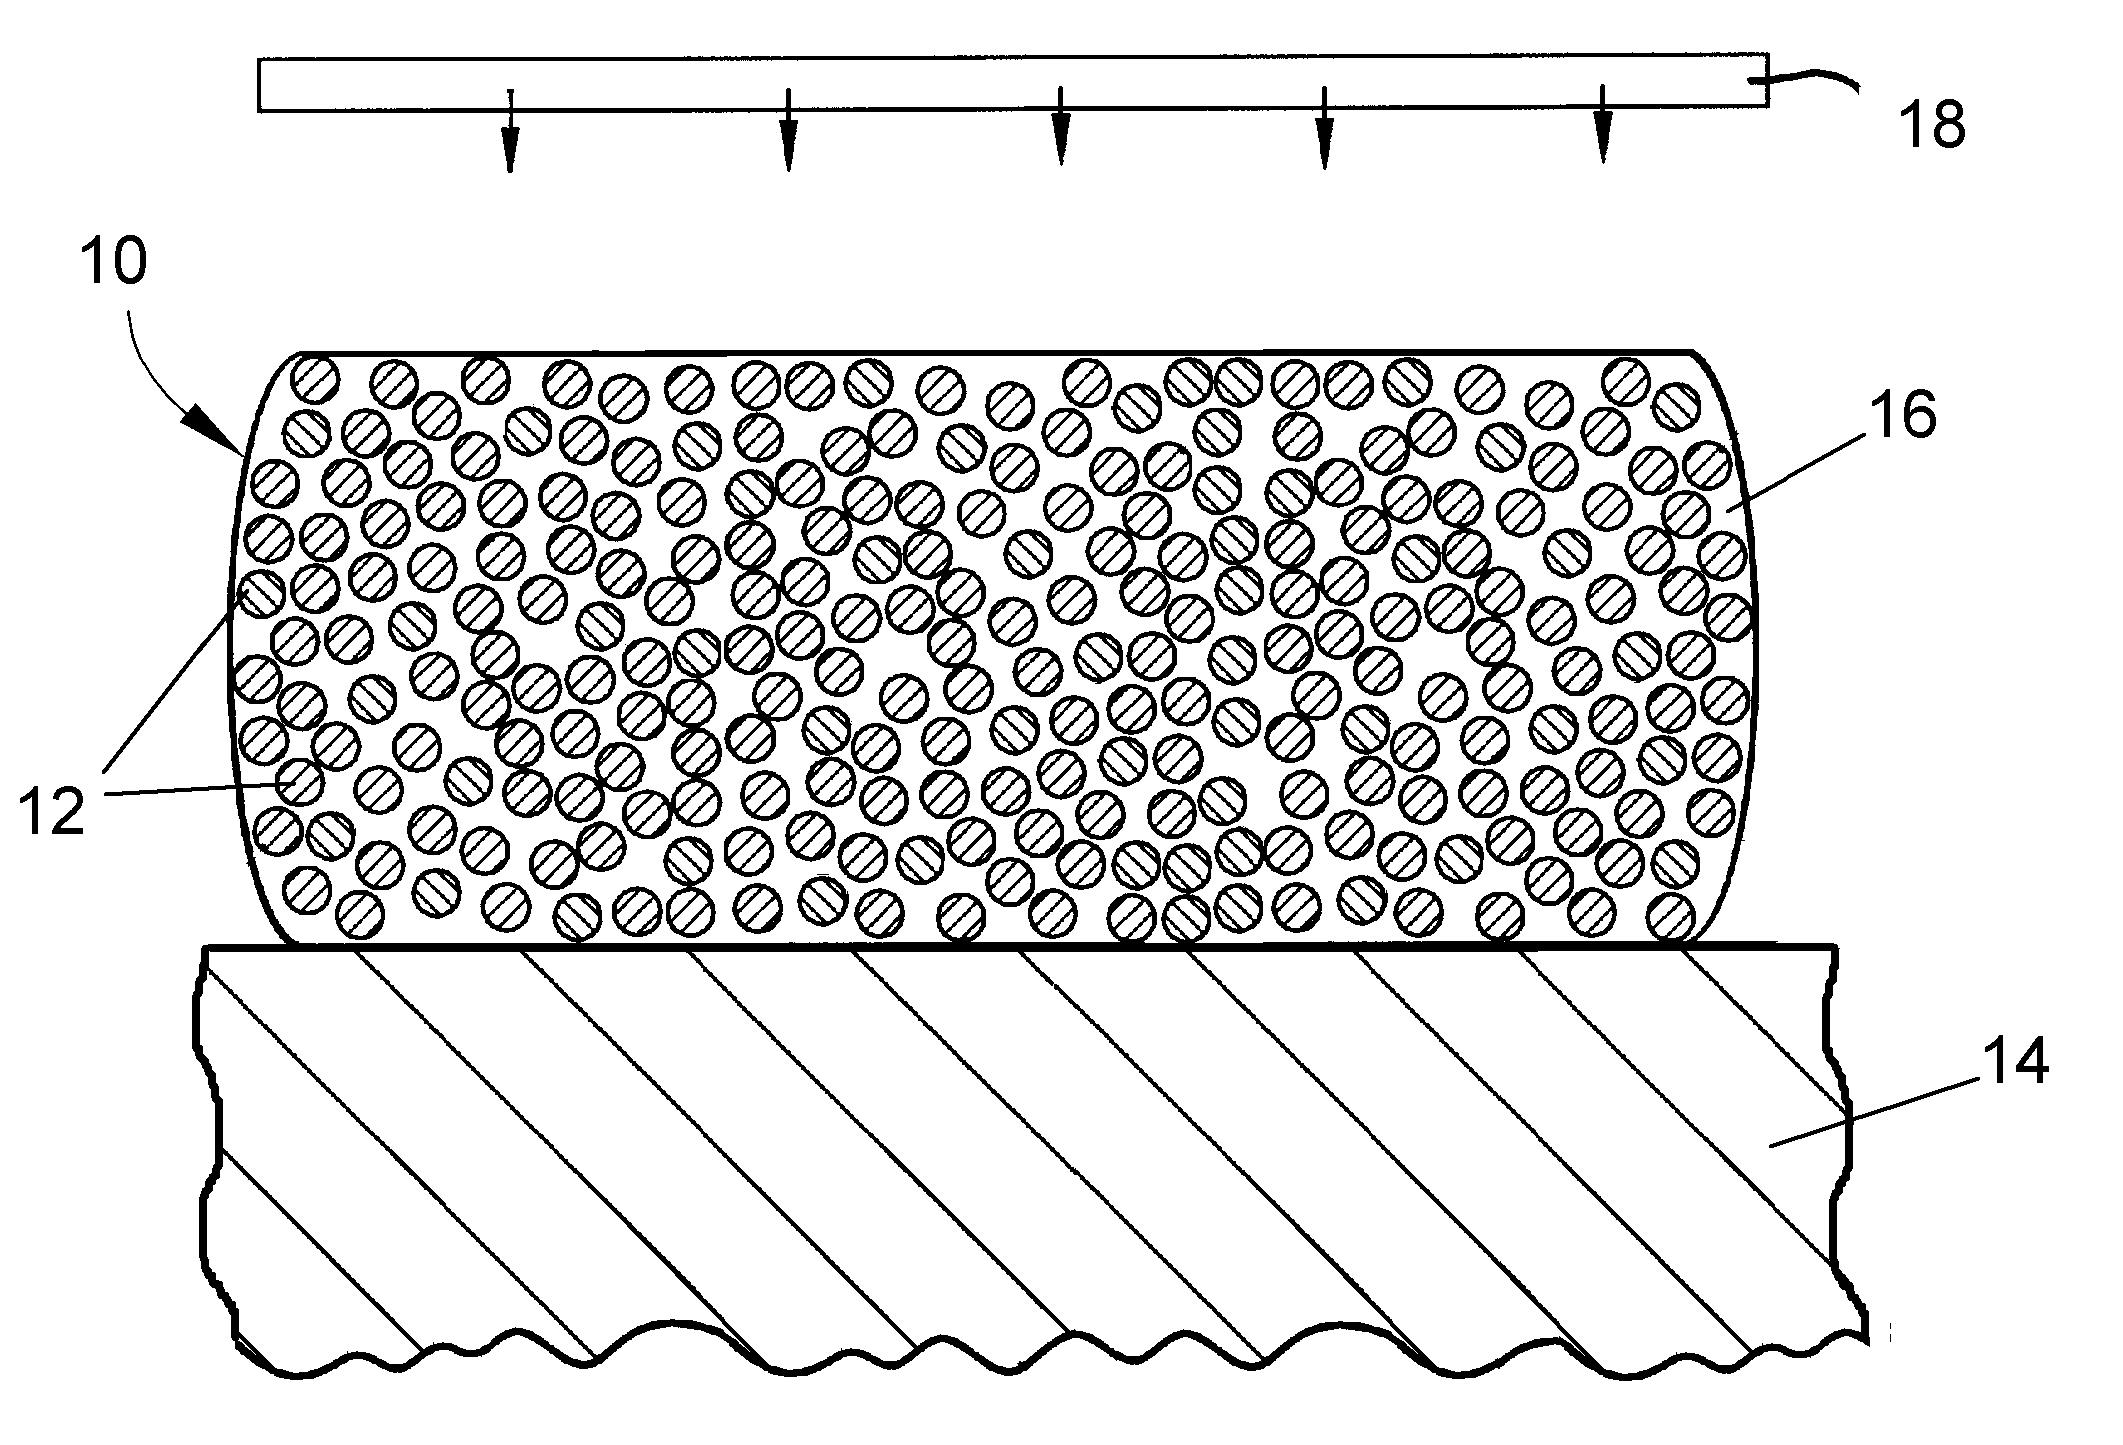 Microwave process for forming a coating